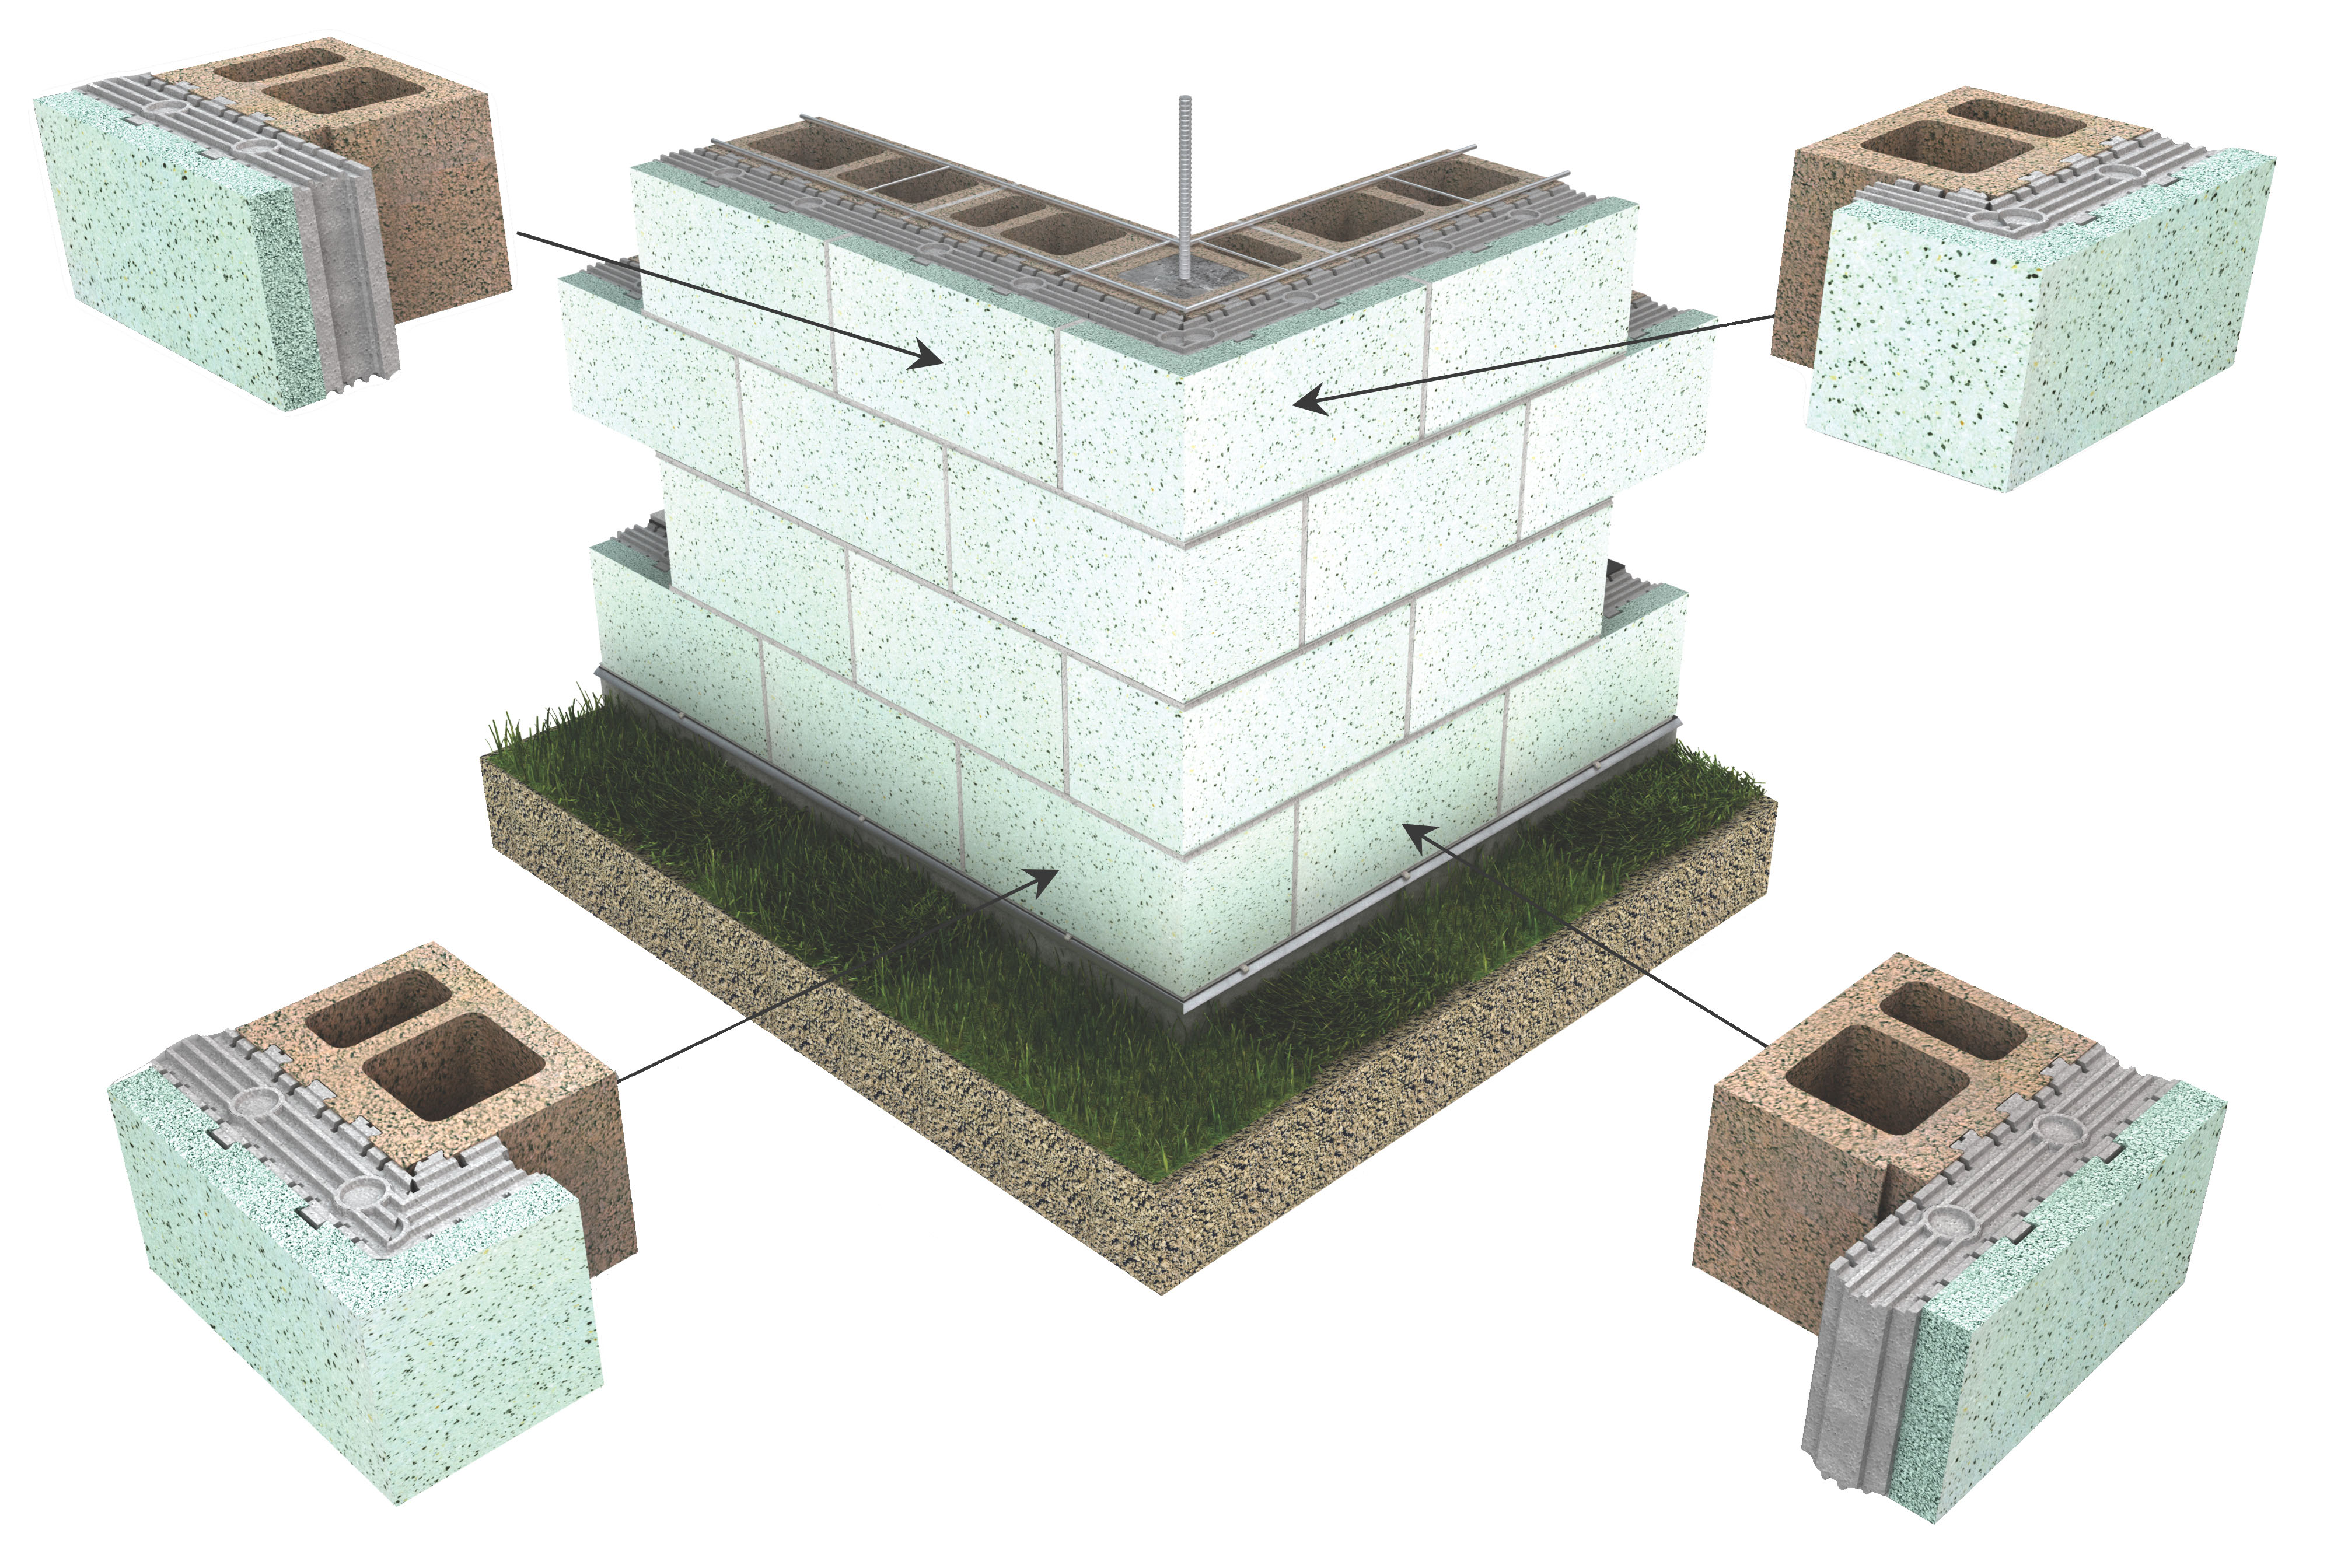 InsulTech combines a structural concrete masonry unit, a molded insulation insert and stone veneer finish.